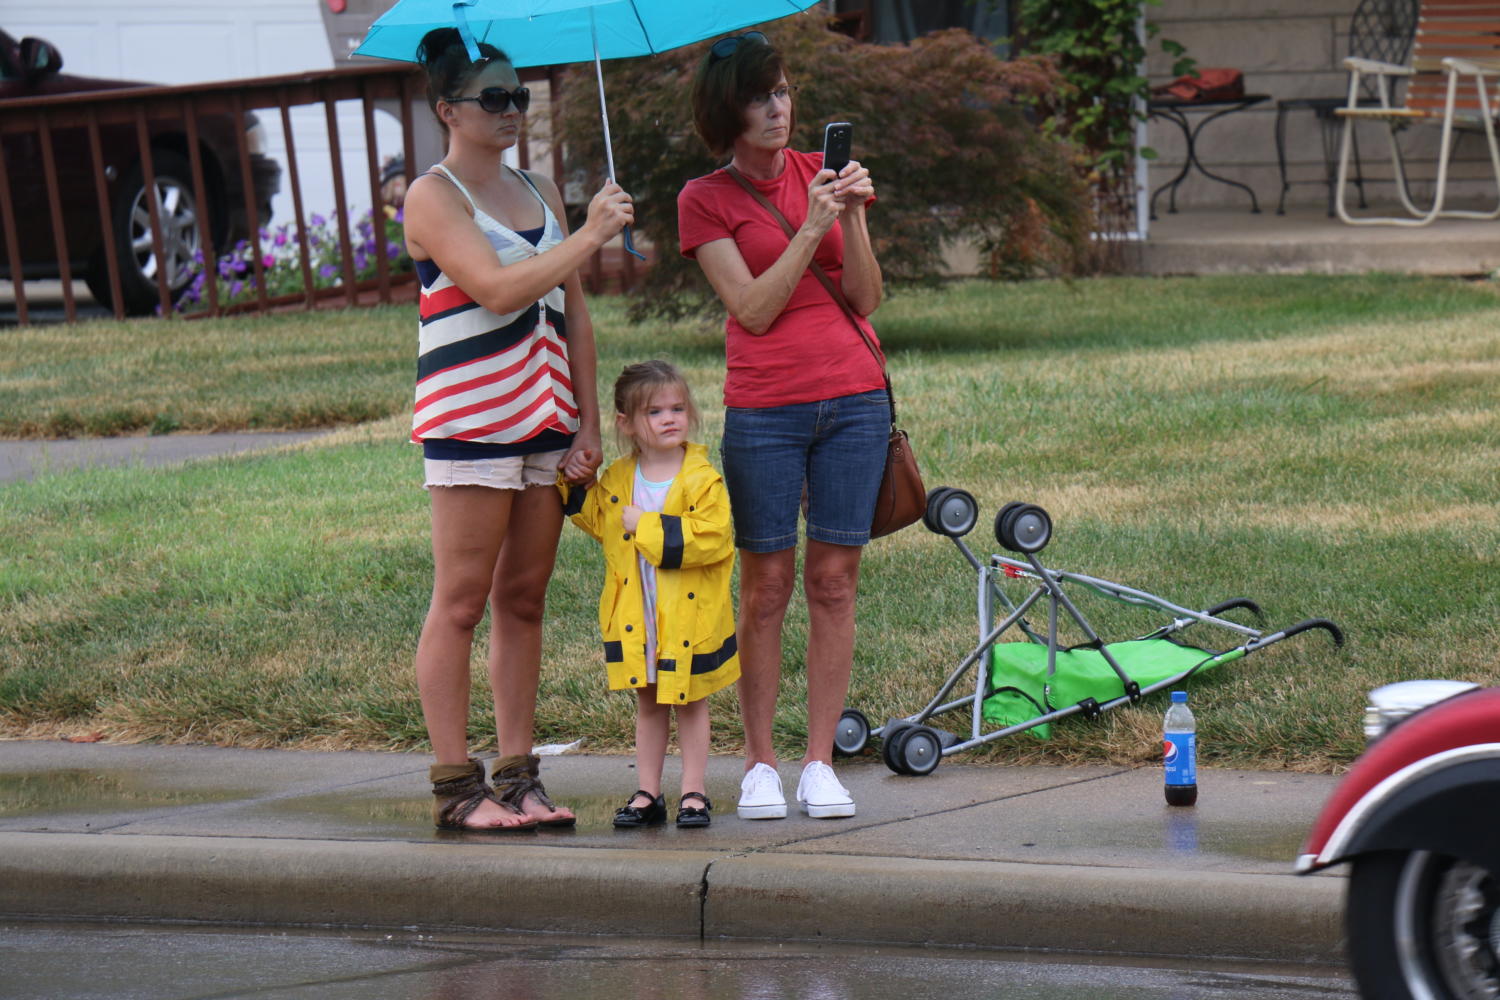 Community members take shelter under an umbrella as Sgt. Hunters funeral procession approaches.